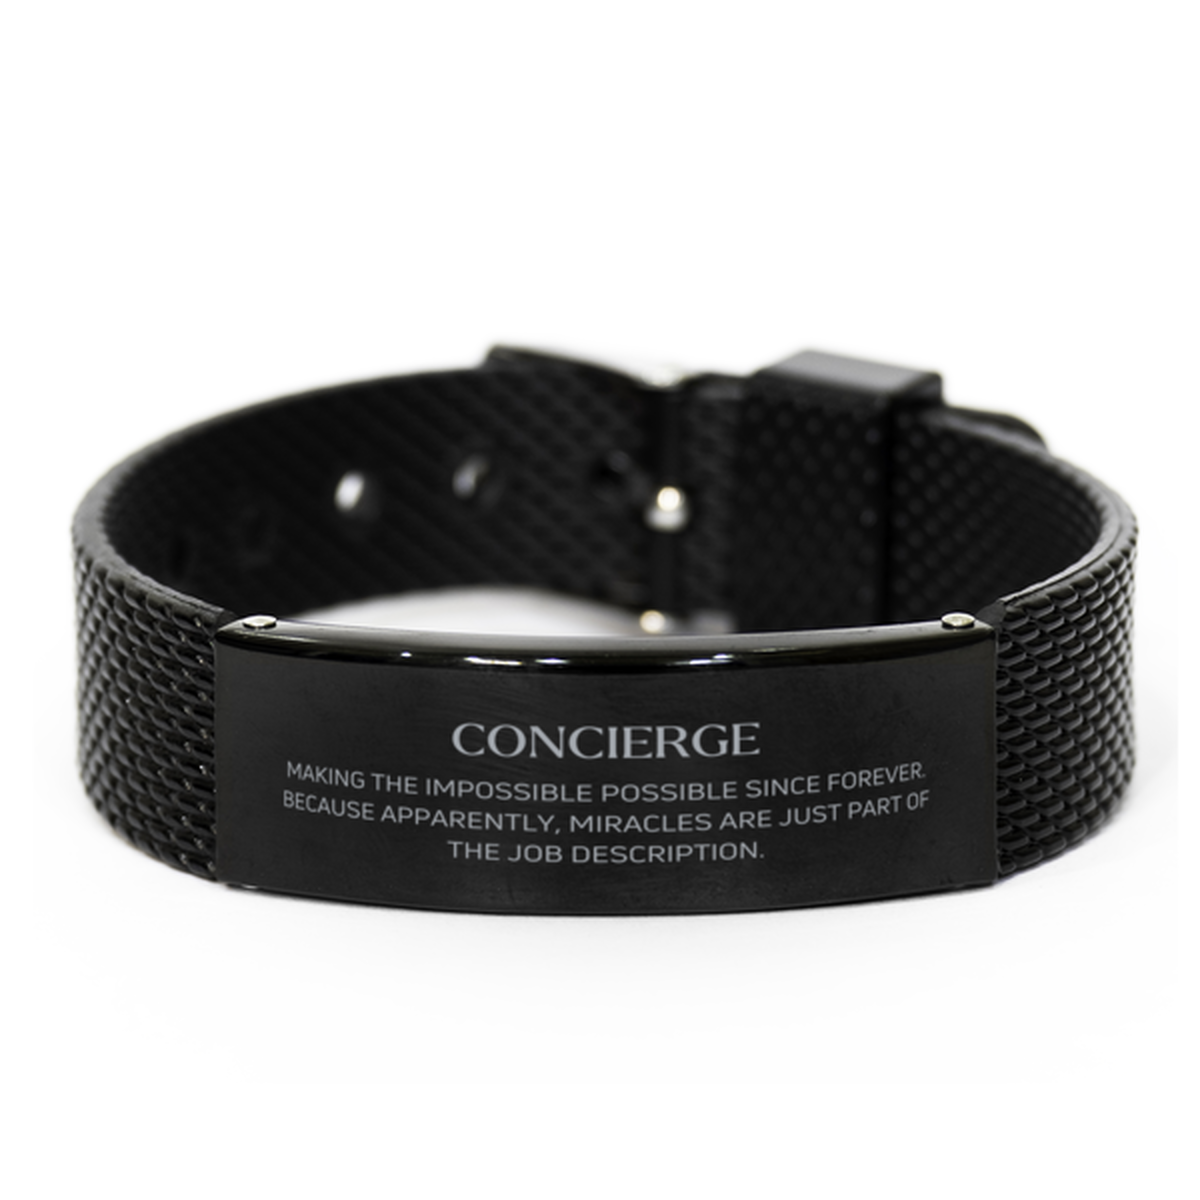 Funny Concierge Gifts, Miracles are just part of the job description, Inspirational Birthday Black Shark Mesh Bracelet For Concierge, Men, Women, Coworkers, Friends, Boss